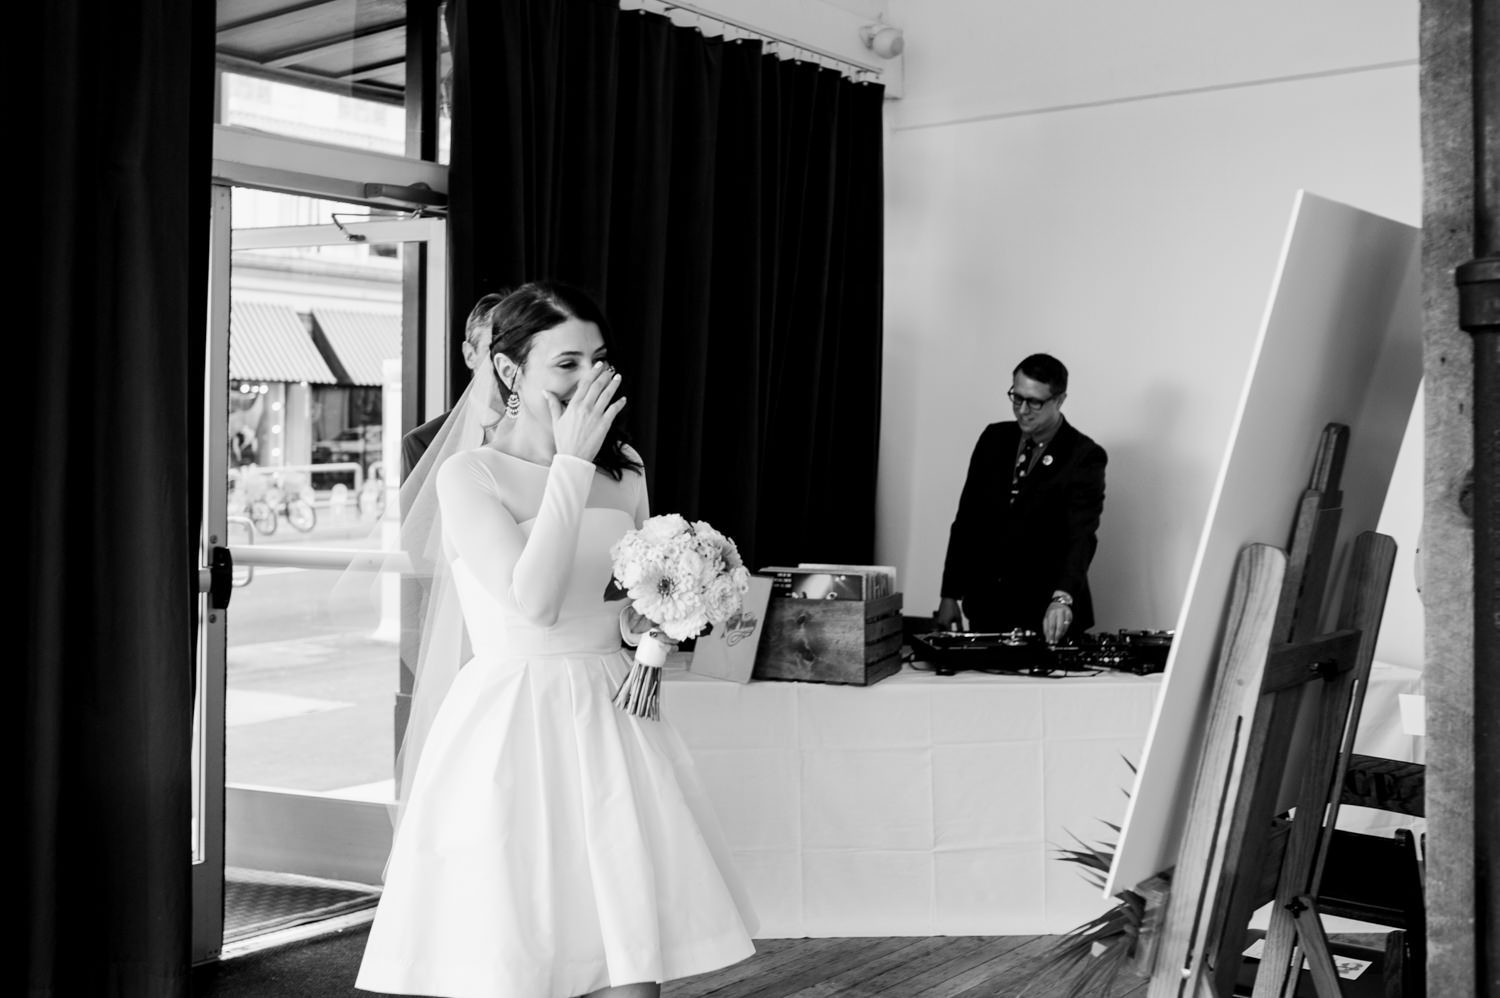 The bride gets emotional as she walks towards the aisle. by Ace Hotel wedding photographer Briana Morrison